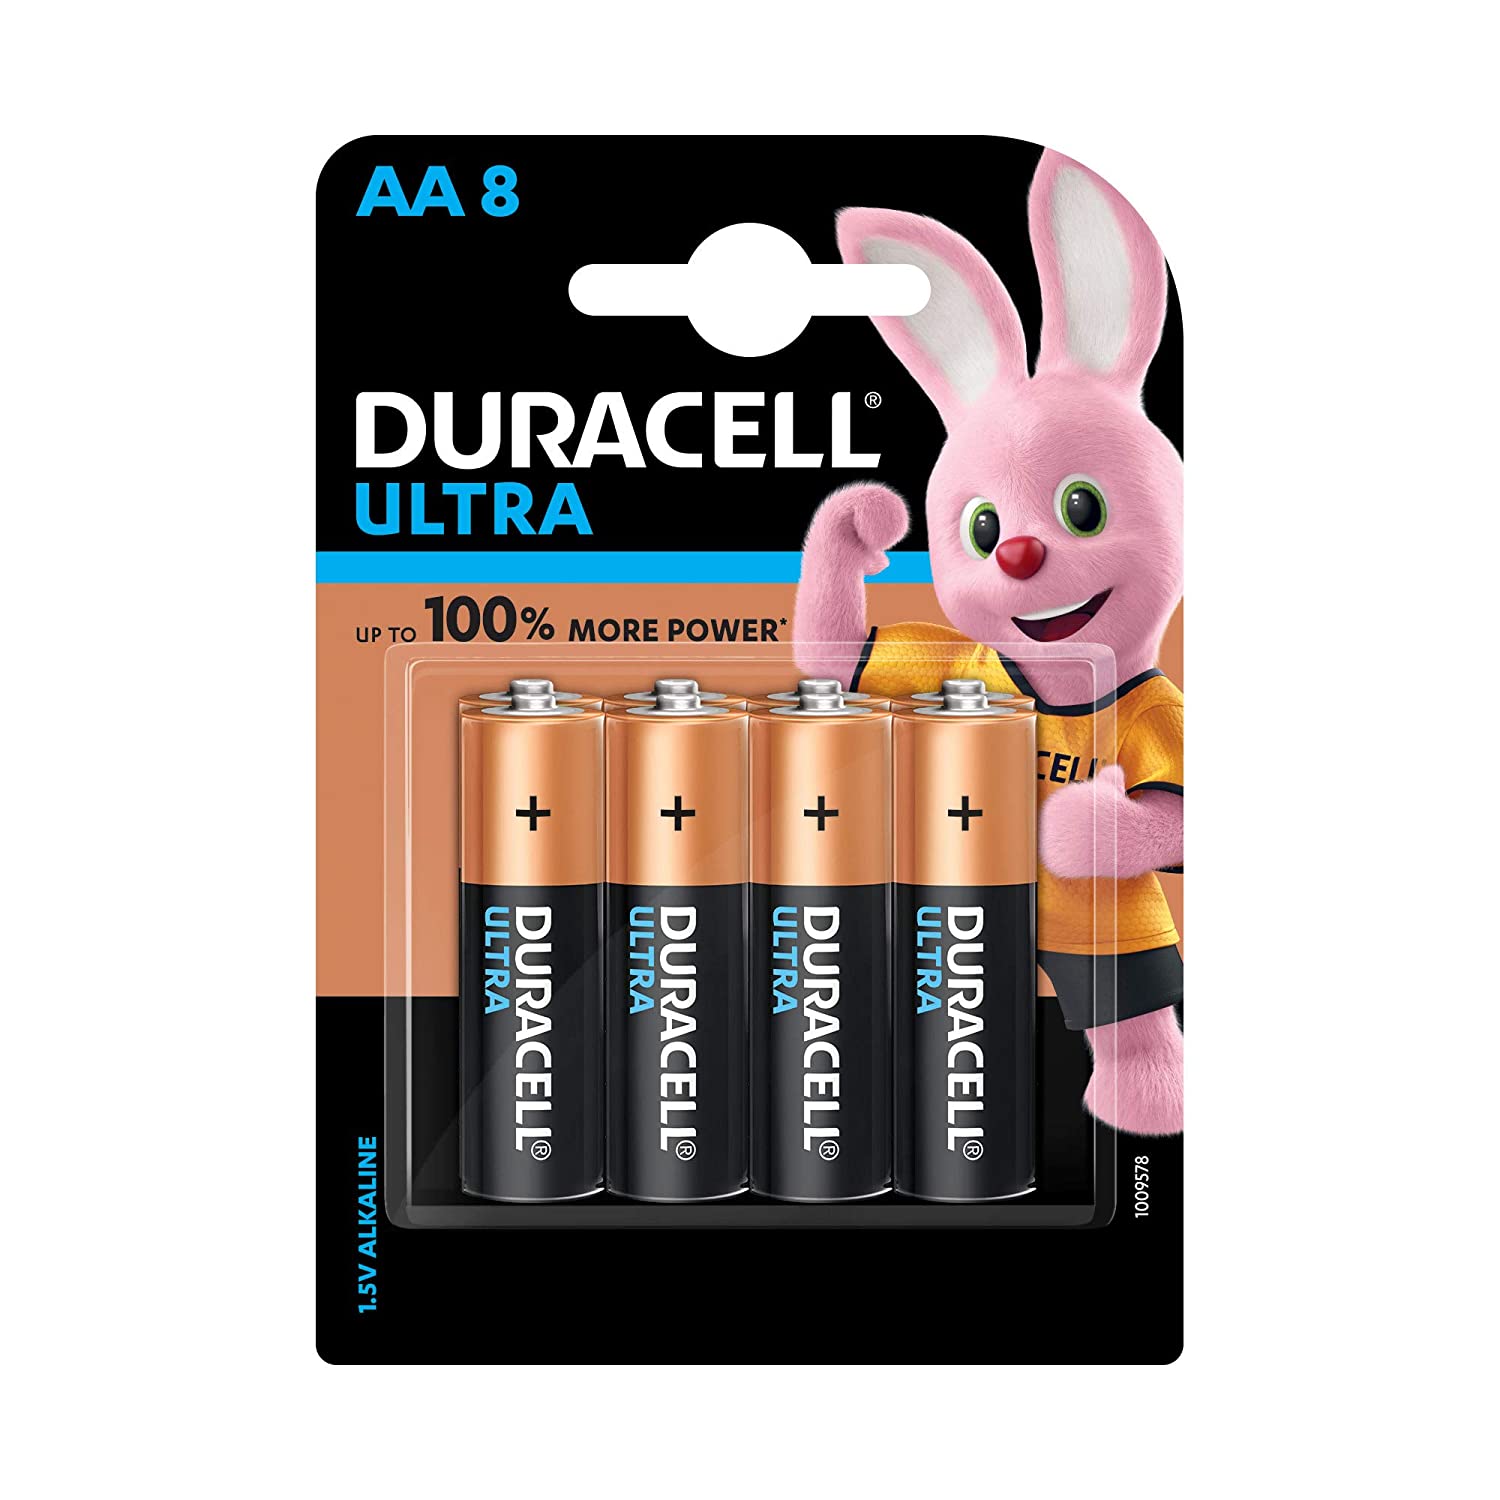 Duracell Ultra Alkaline AA Battery, 8 Pieces - Pack of 2